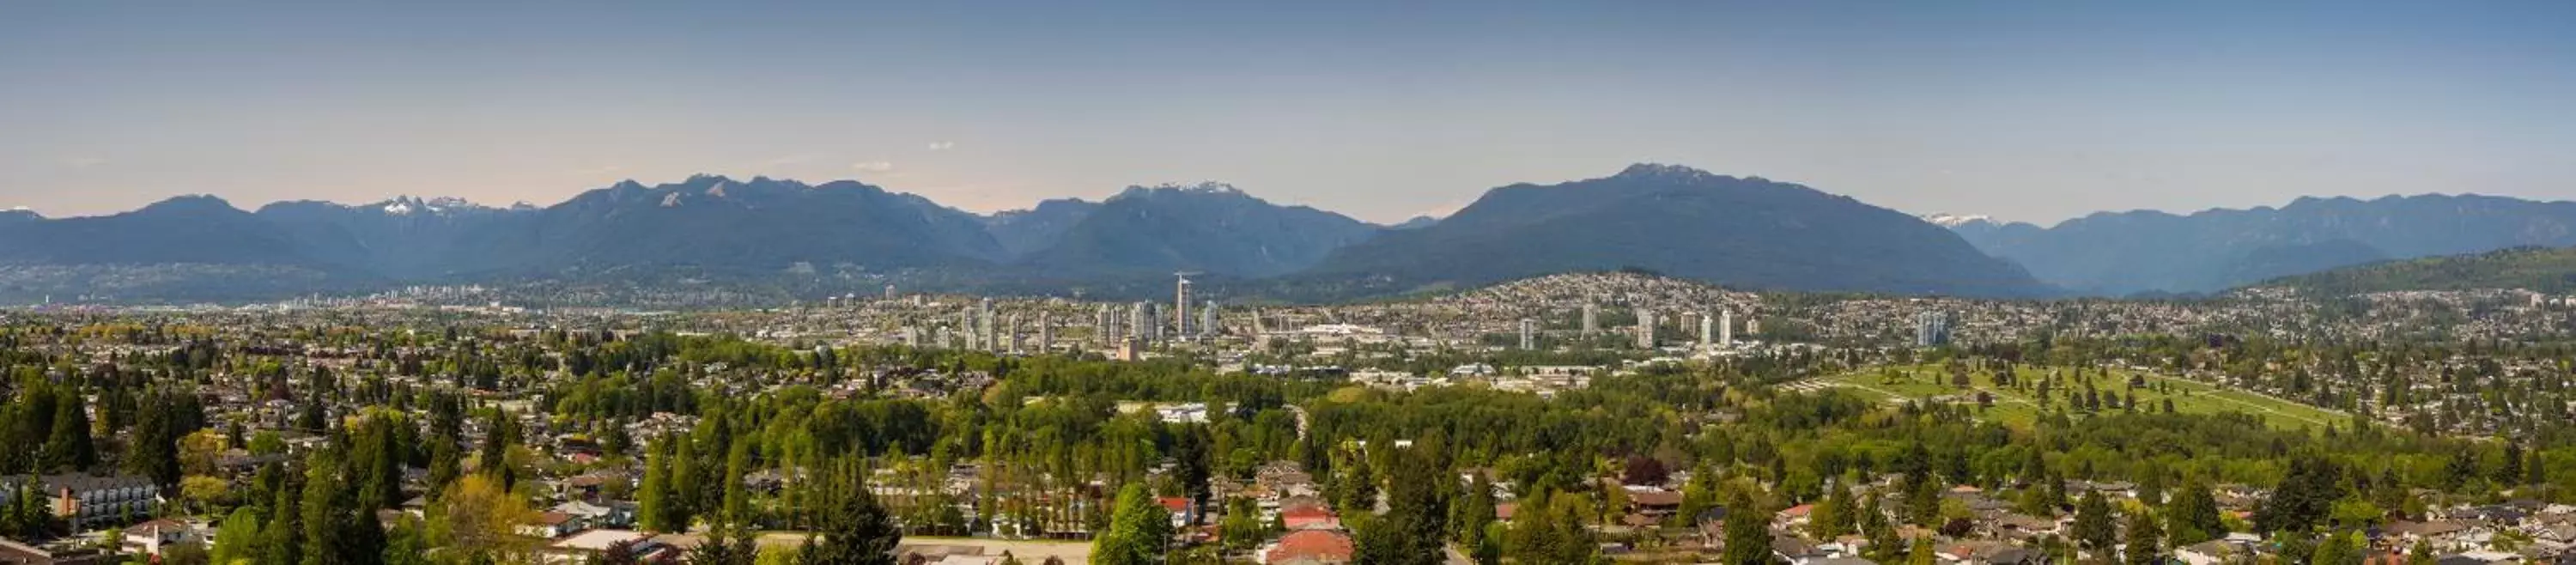 Mountain view in Element Vancouver Metrotown